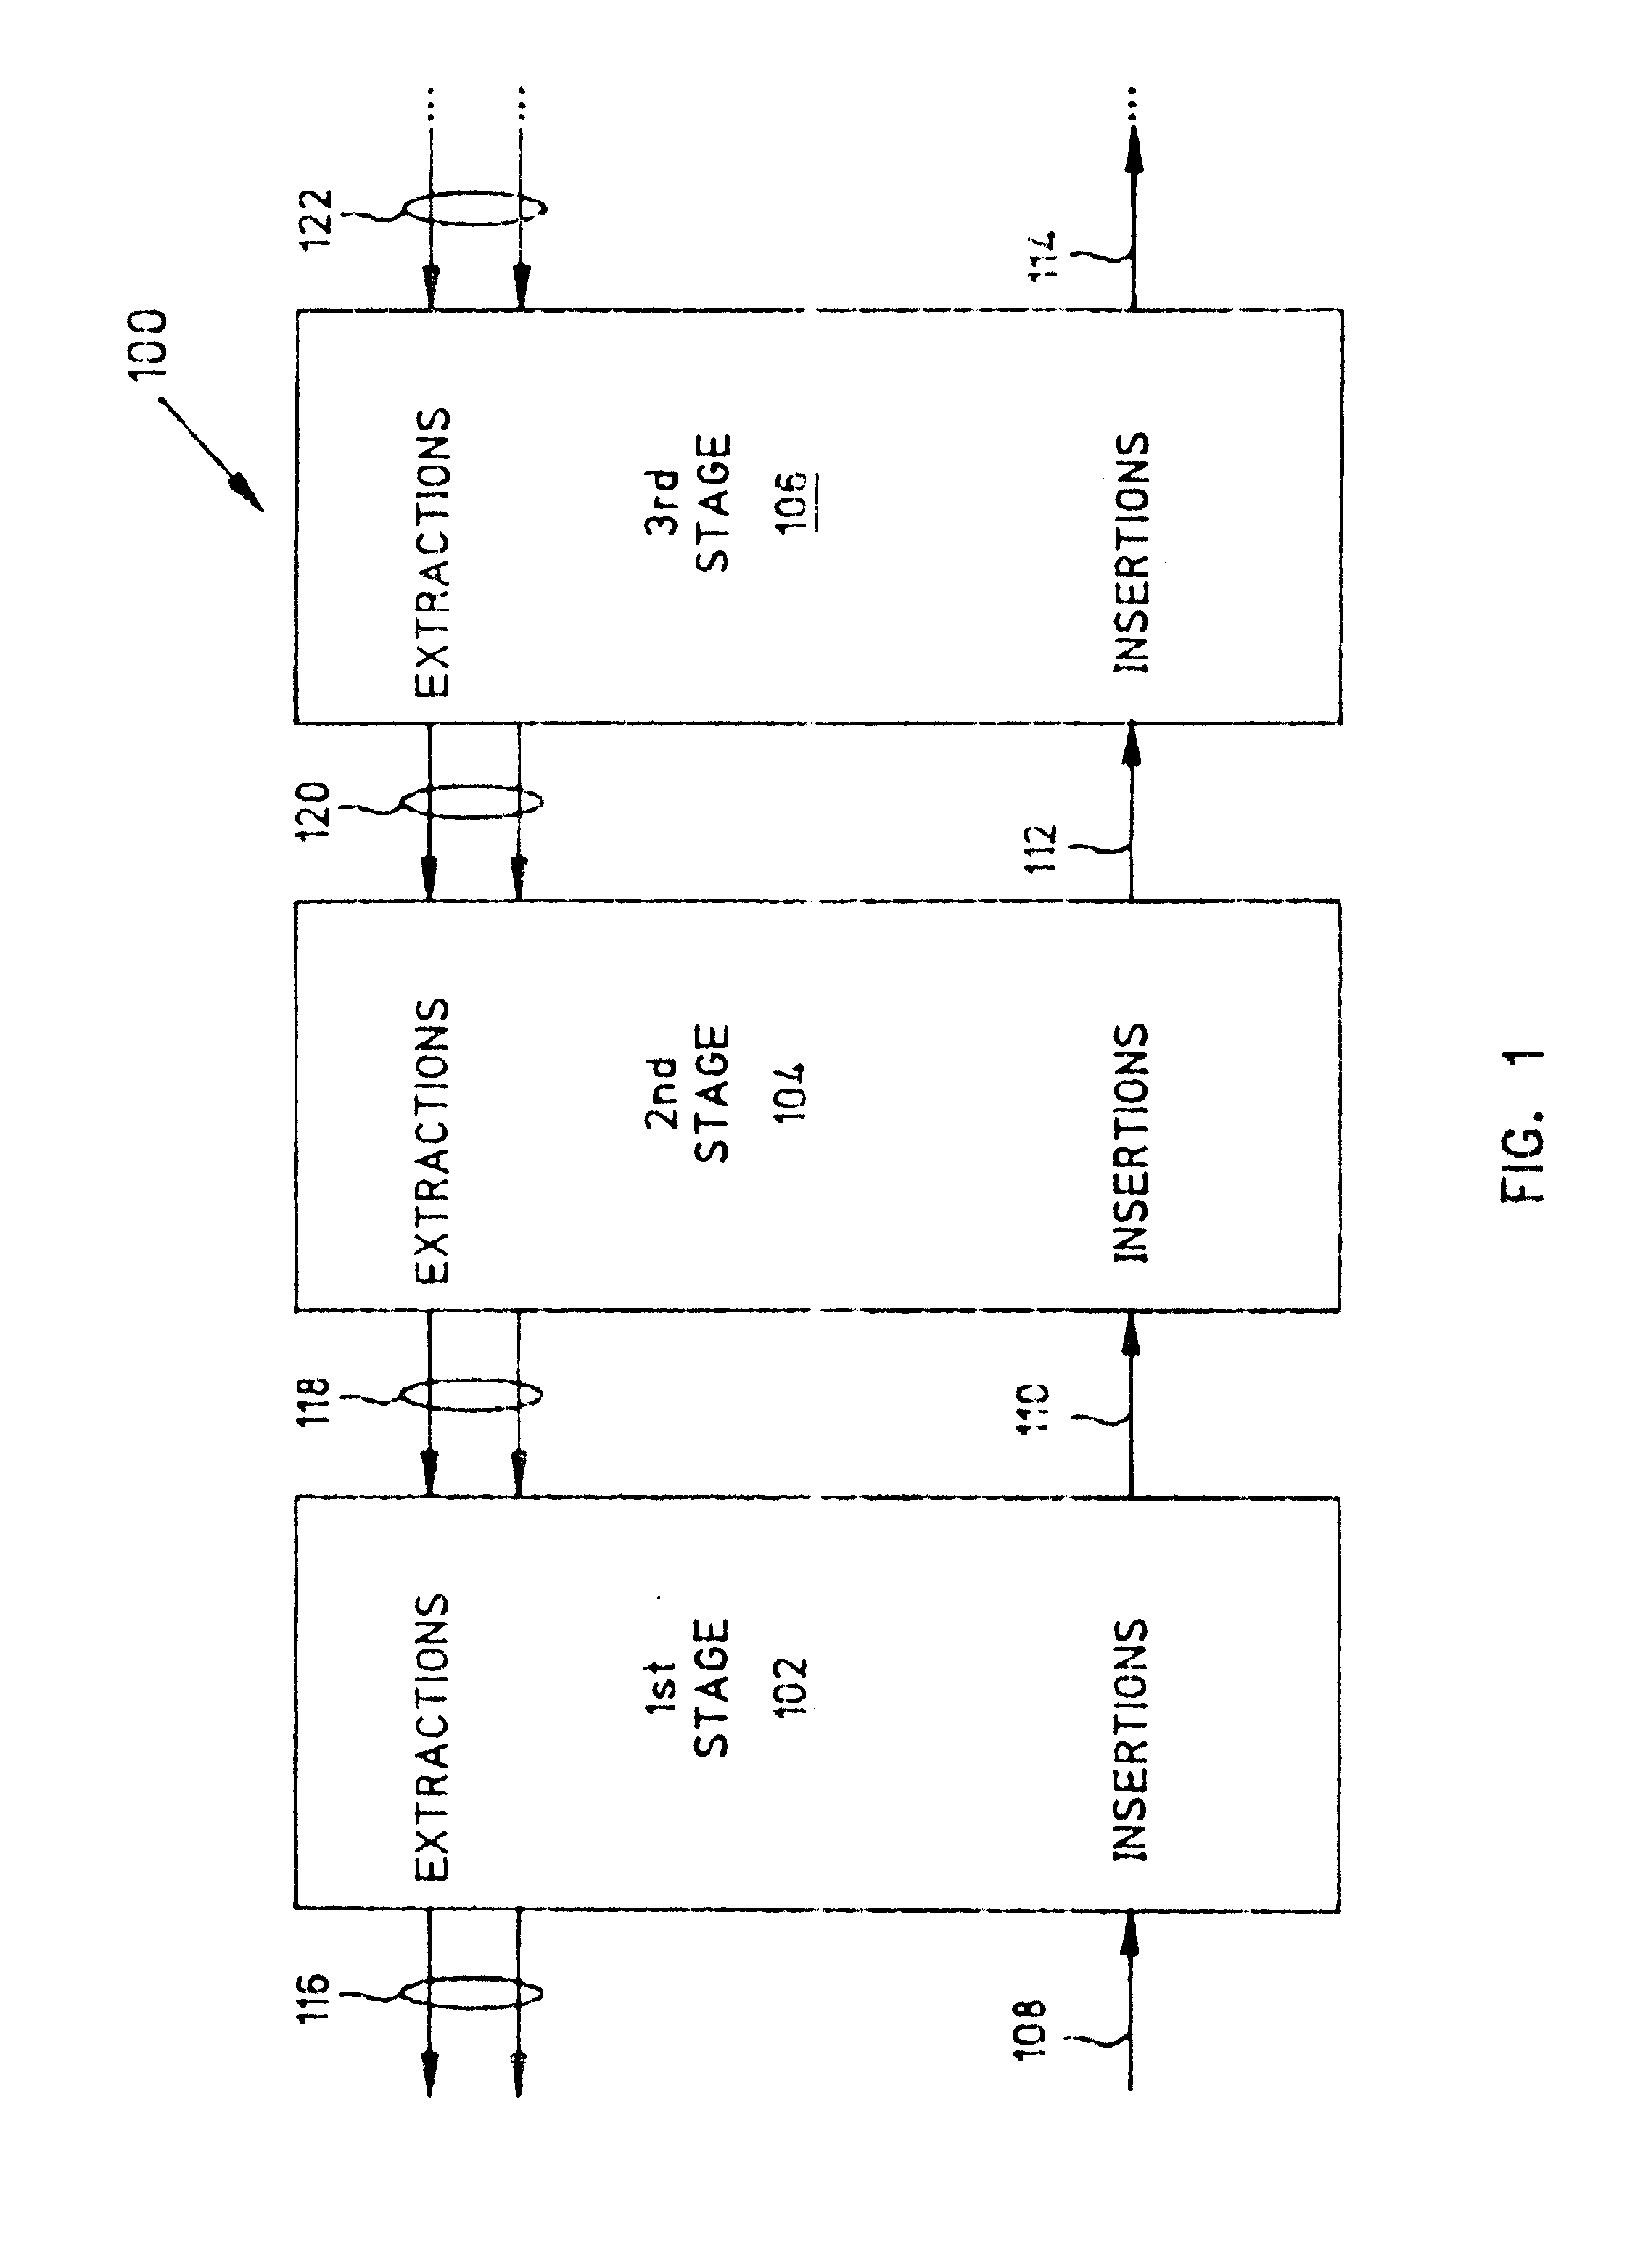 System and method for systolic array sorting of information segments